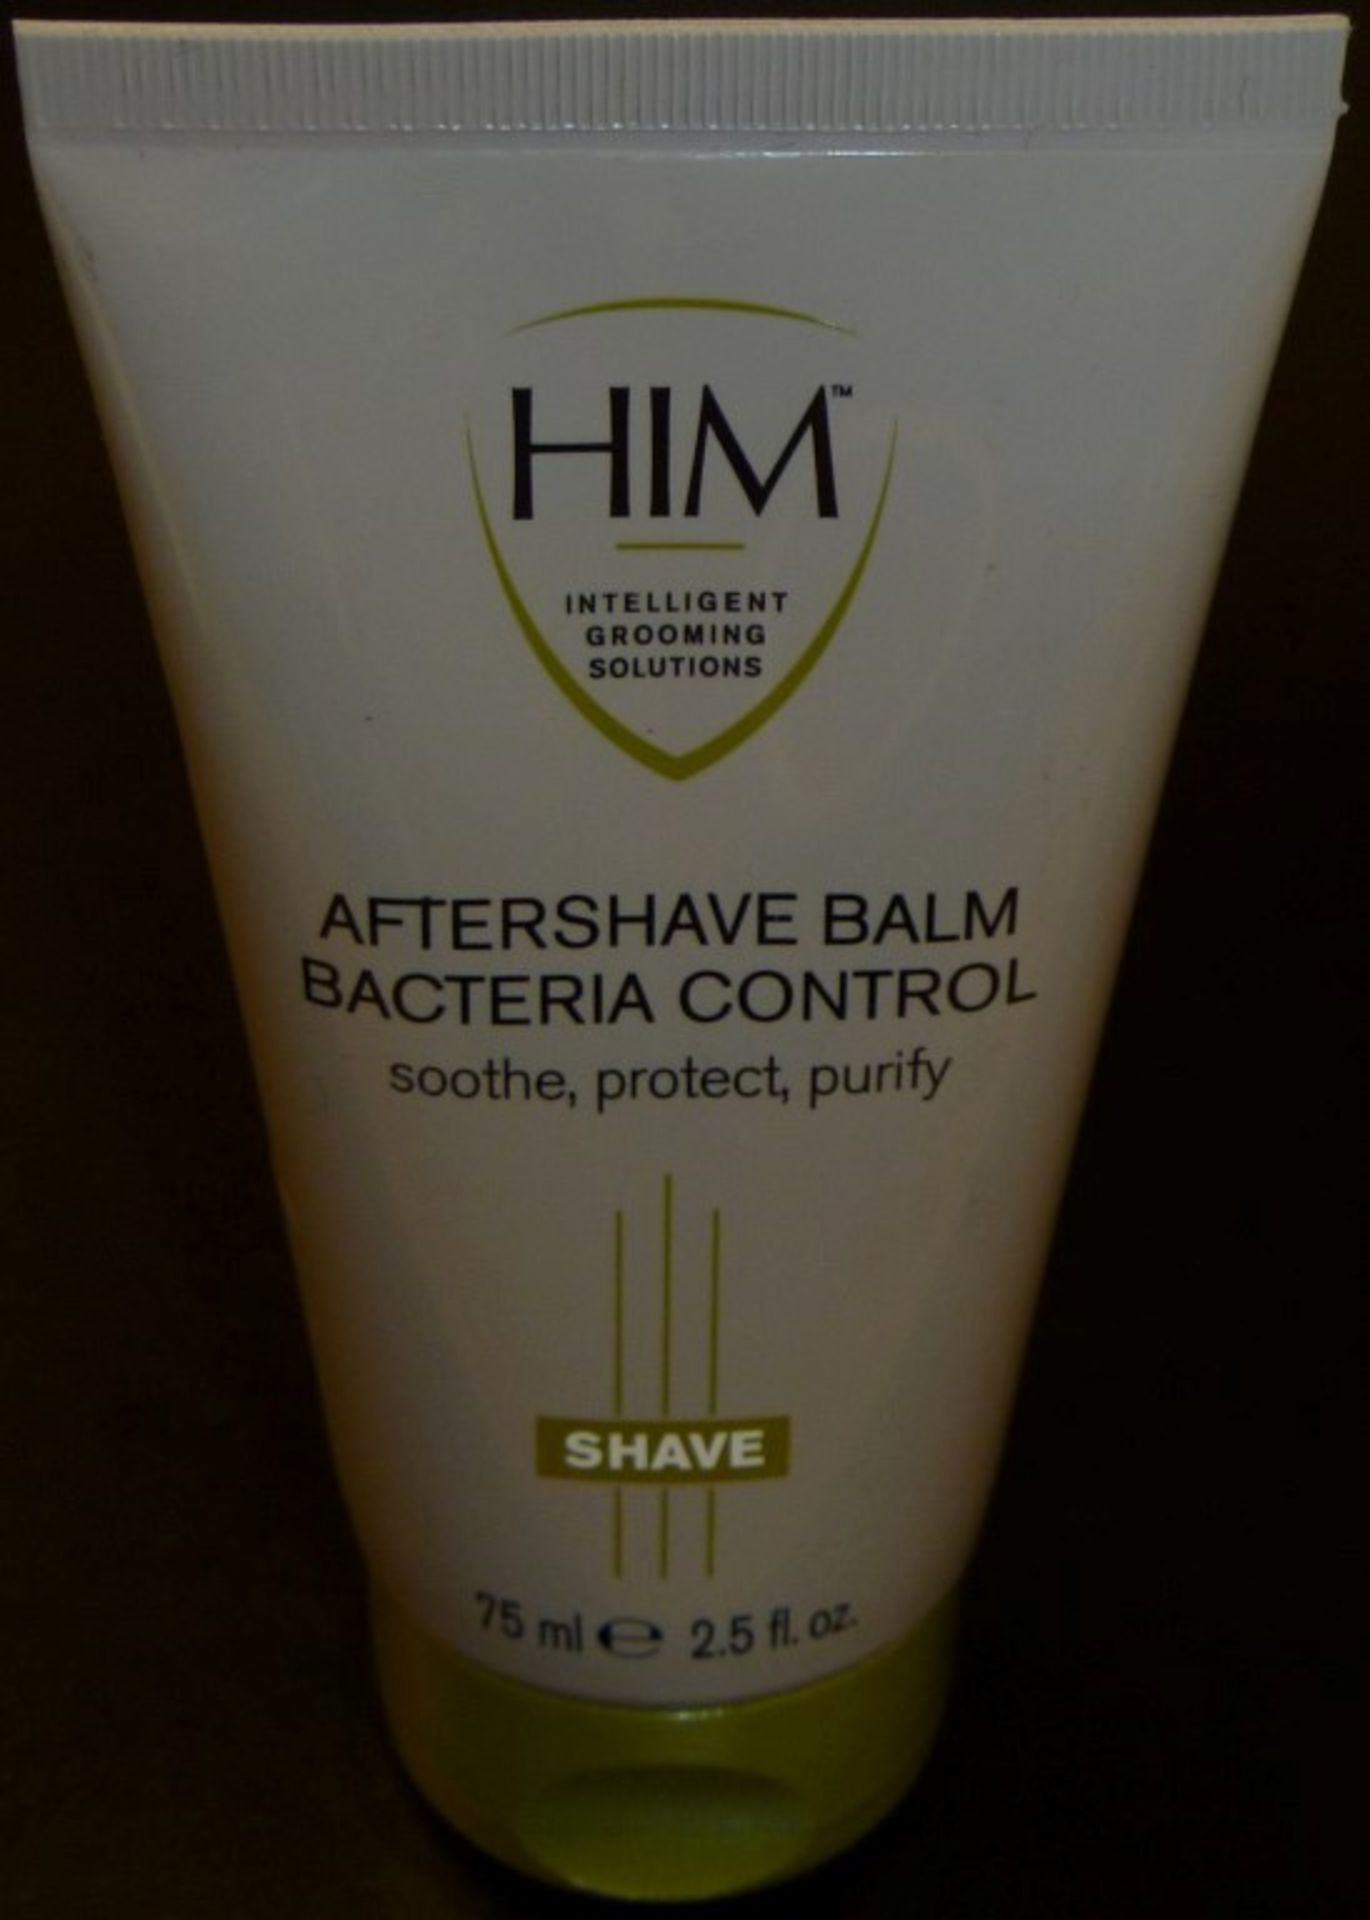 20 x HIM Intelligent Grooming Solutions - 75ml AFTERSHAVE BALM BACTERIA CONTROL - Brand New - Image 3 of 5